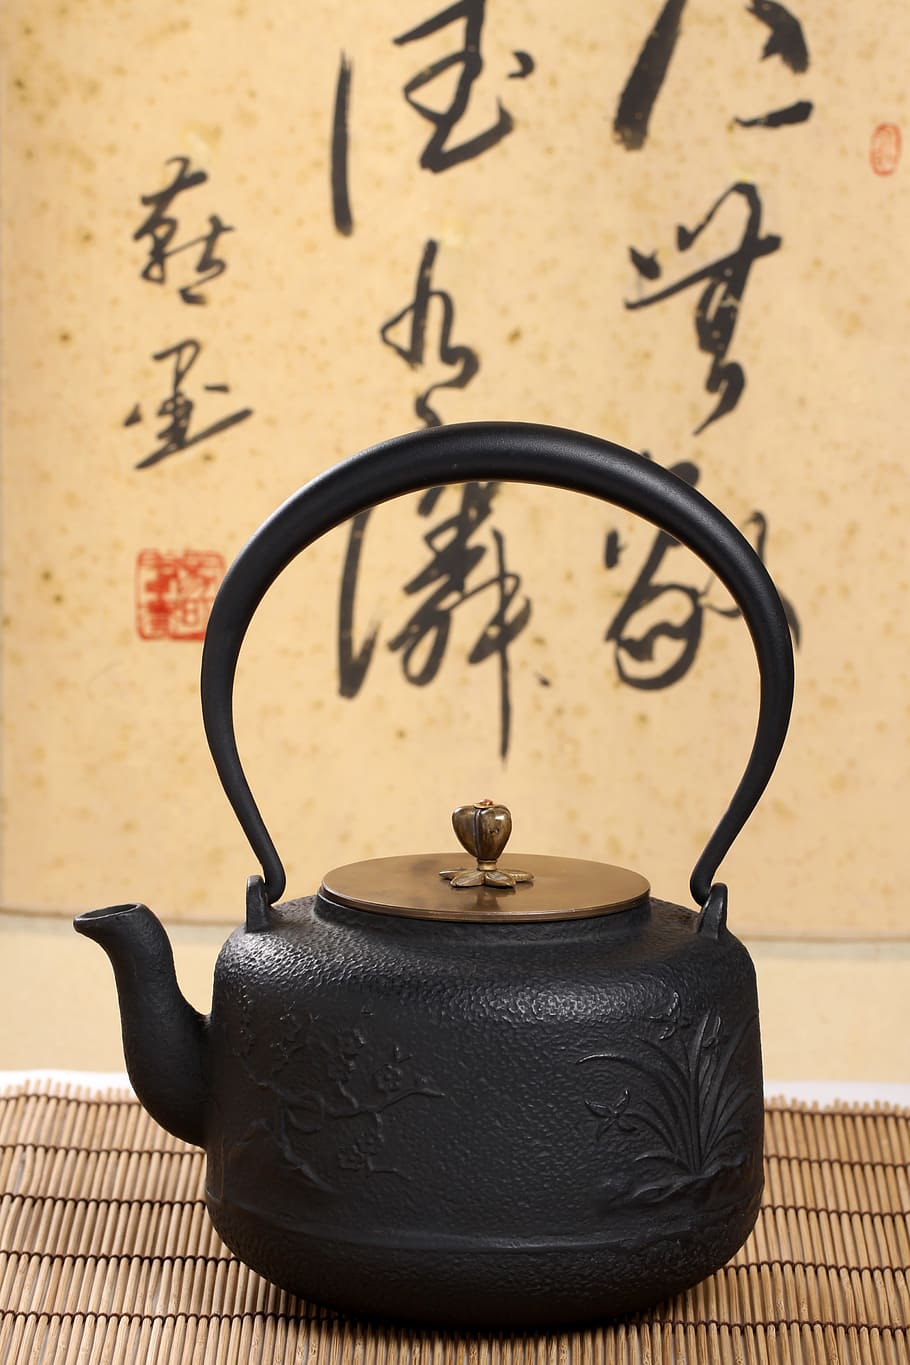 white kettle, tea, teapot, close-up, indoors, black color, still life, focus on foreground, wall - building feature, table